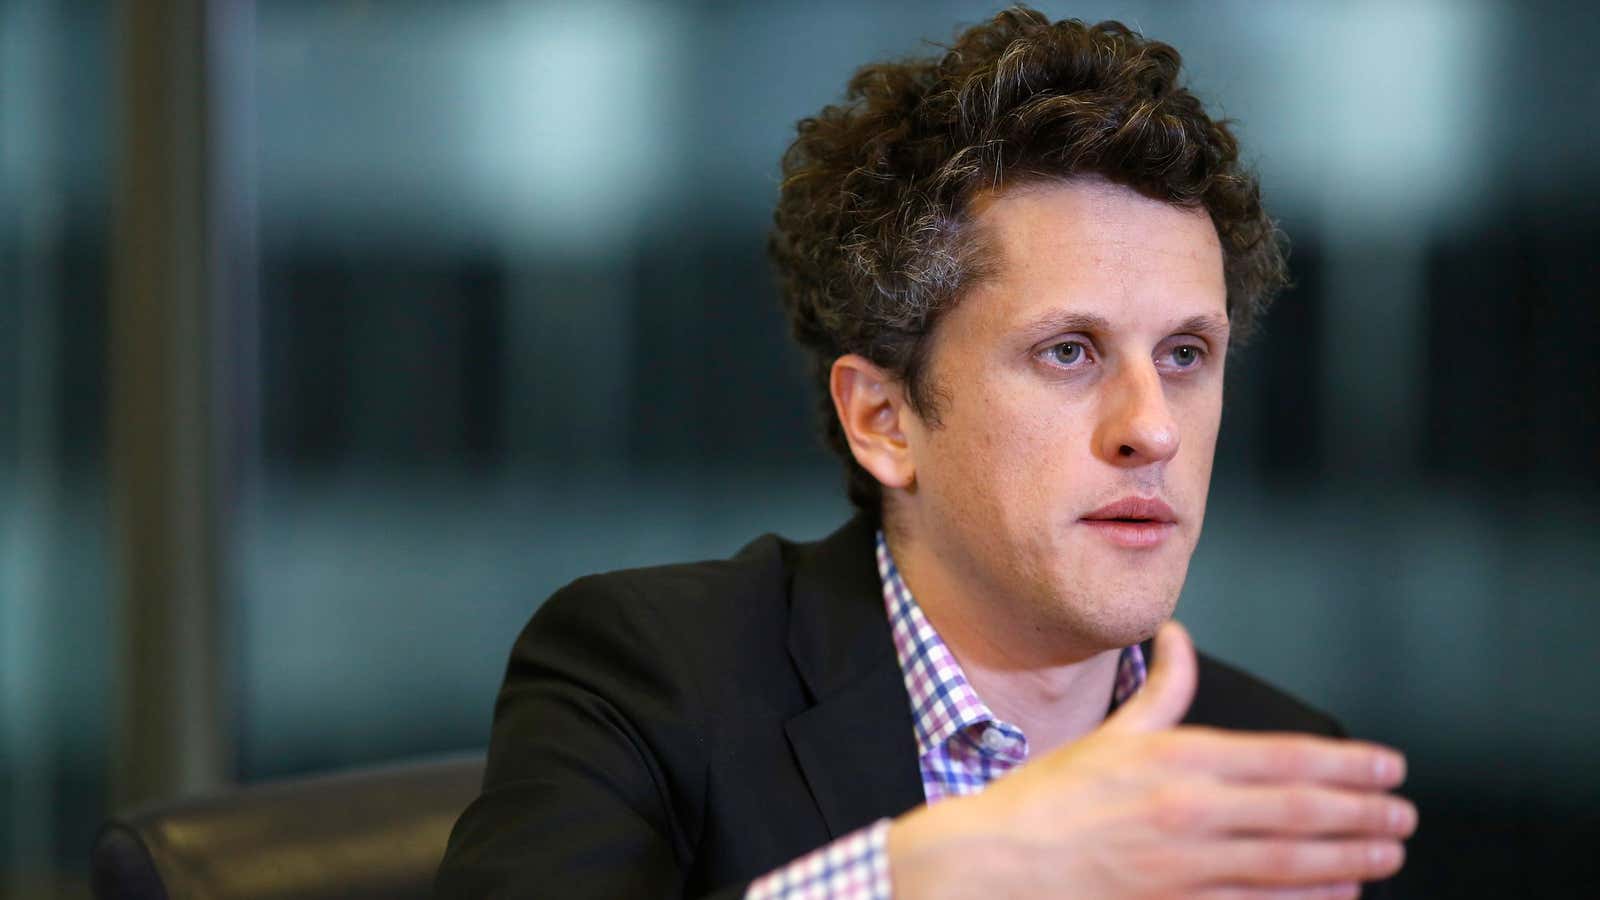 Box co-founder and CEO Aaron Levie.